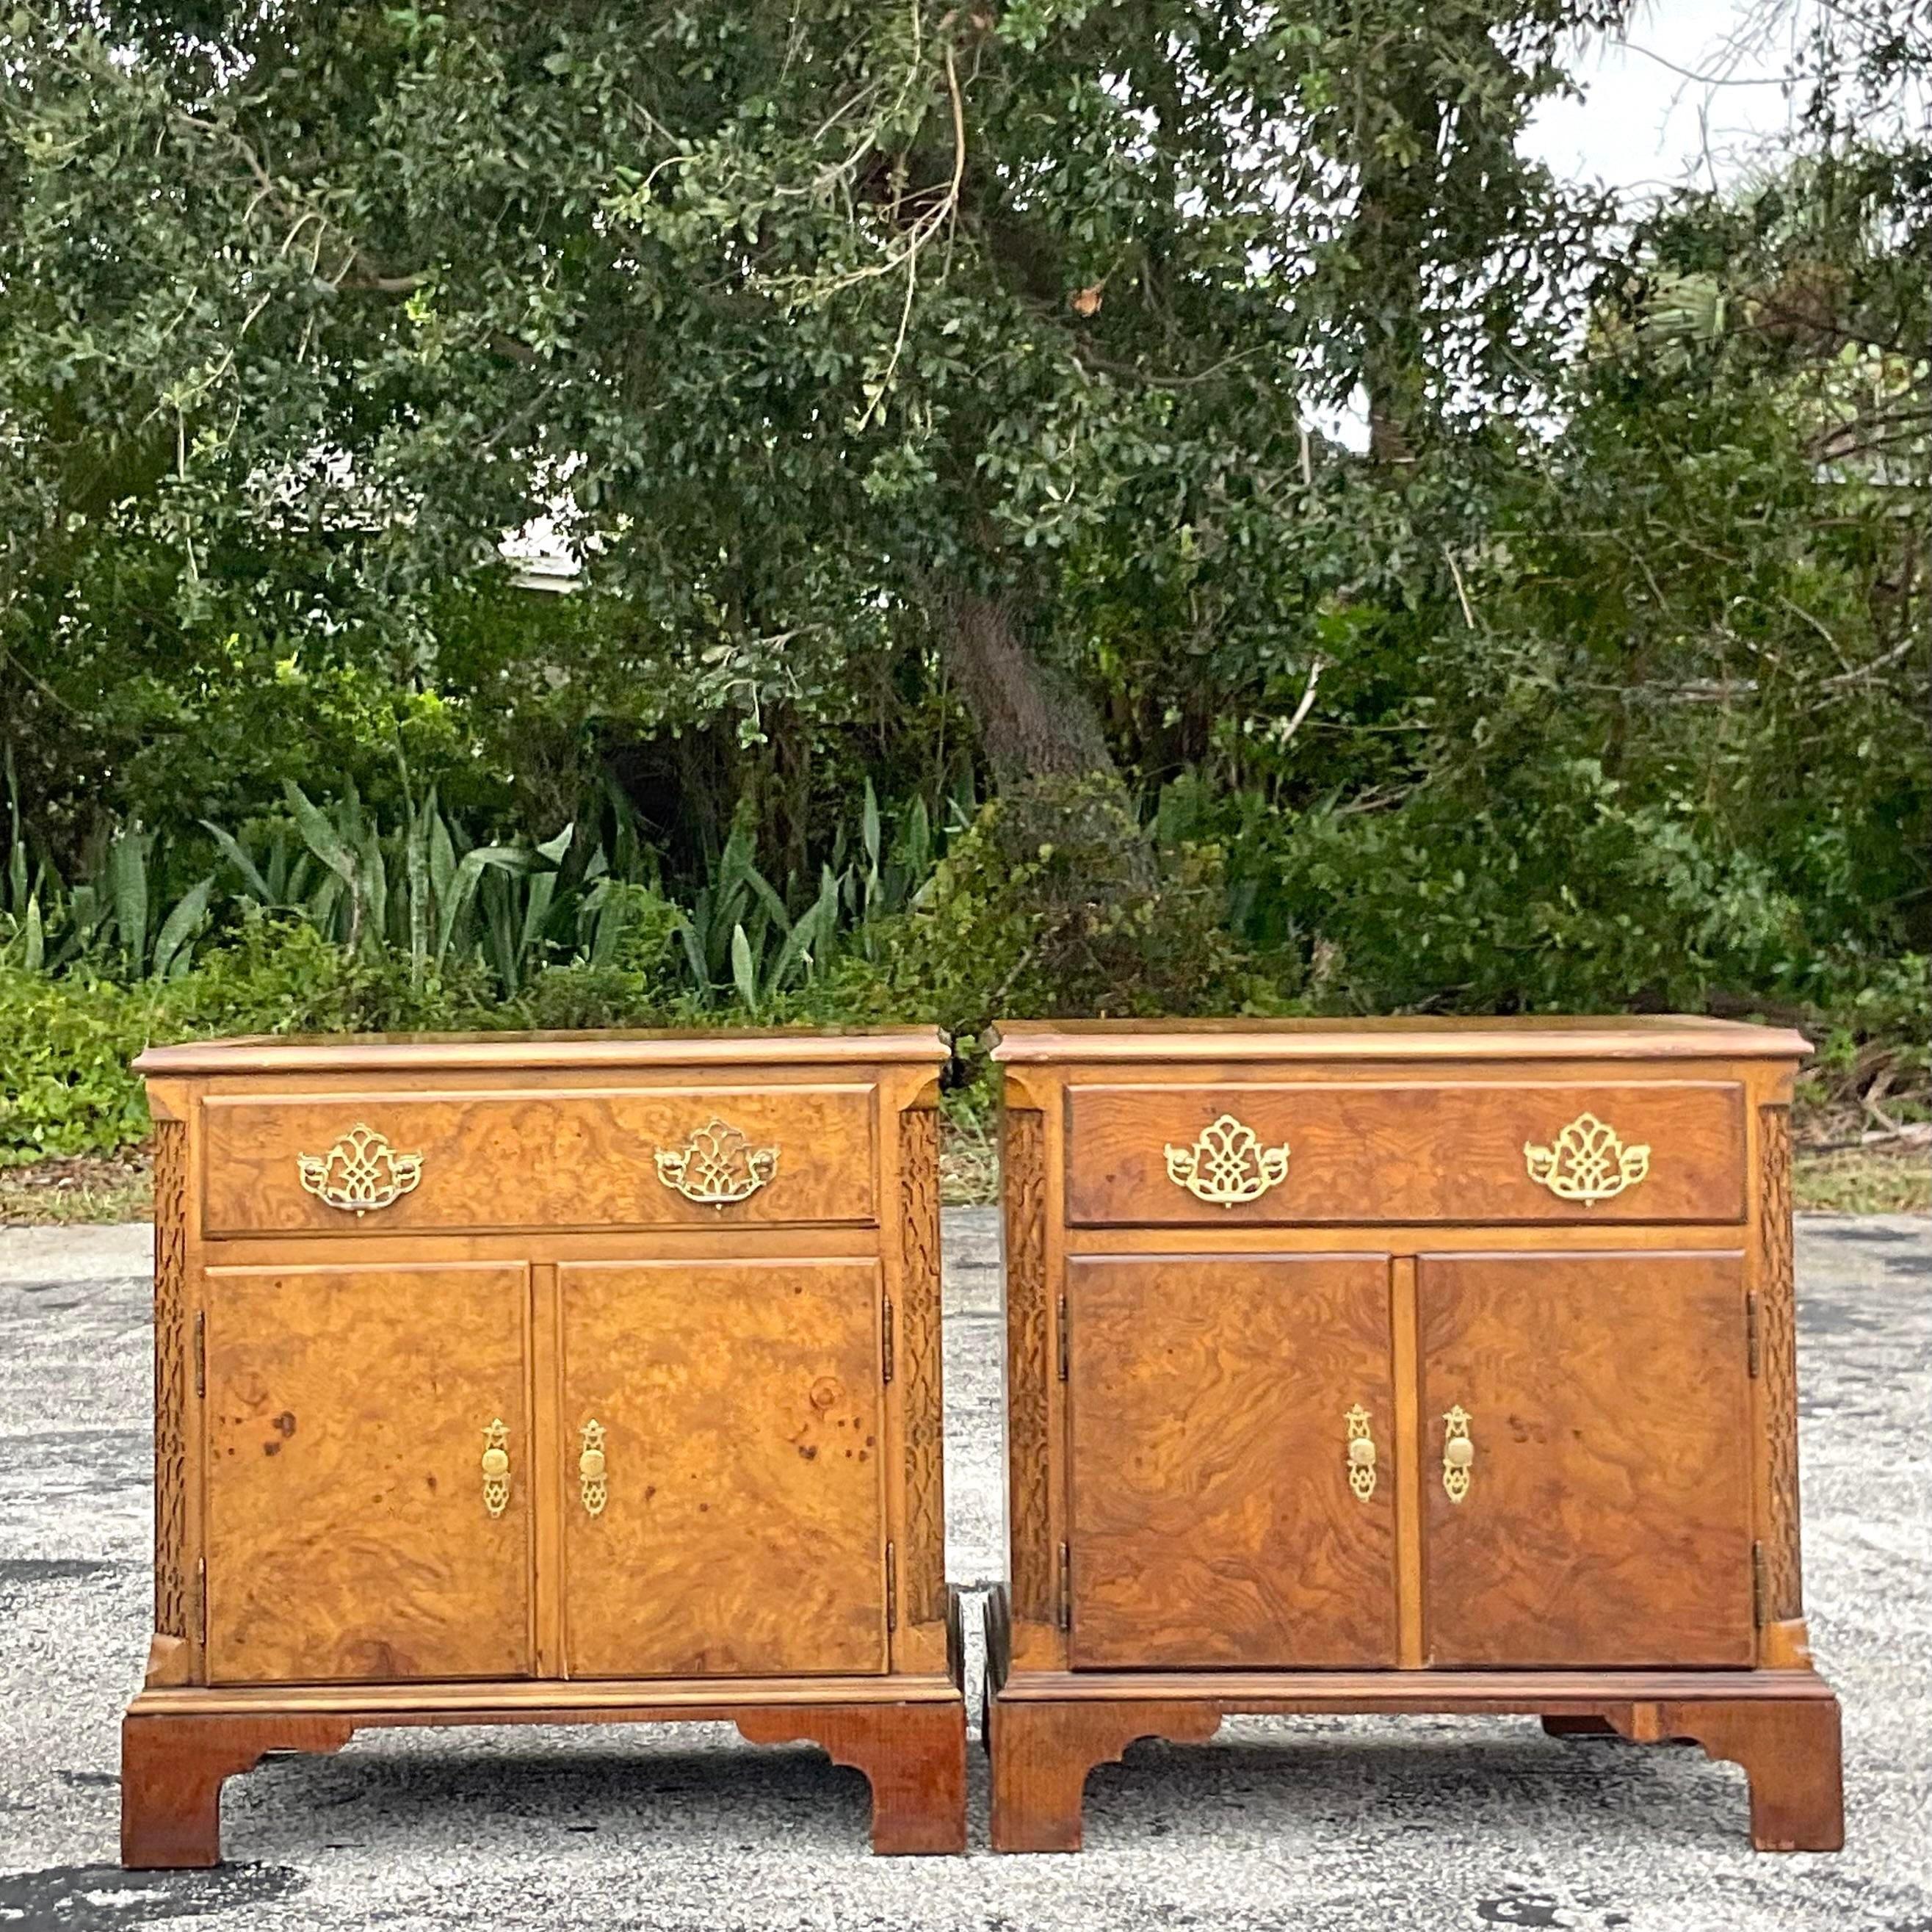 A fantastic pair of vintage Regency nightstands. Made by the iconic Baker group and tagged in the drawer. Gorgeous Burl wood cabinet with chic fretwork trim. Coordinating pieces also available on my page. Acquired from a Palm Beach estate